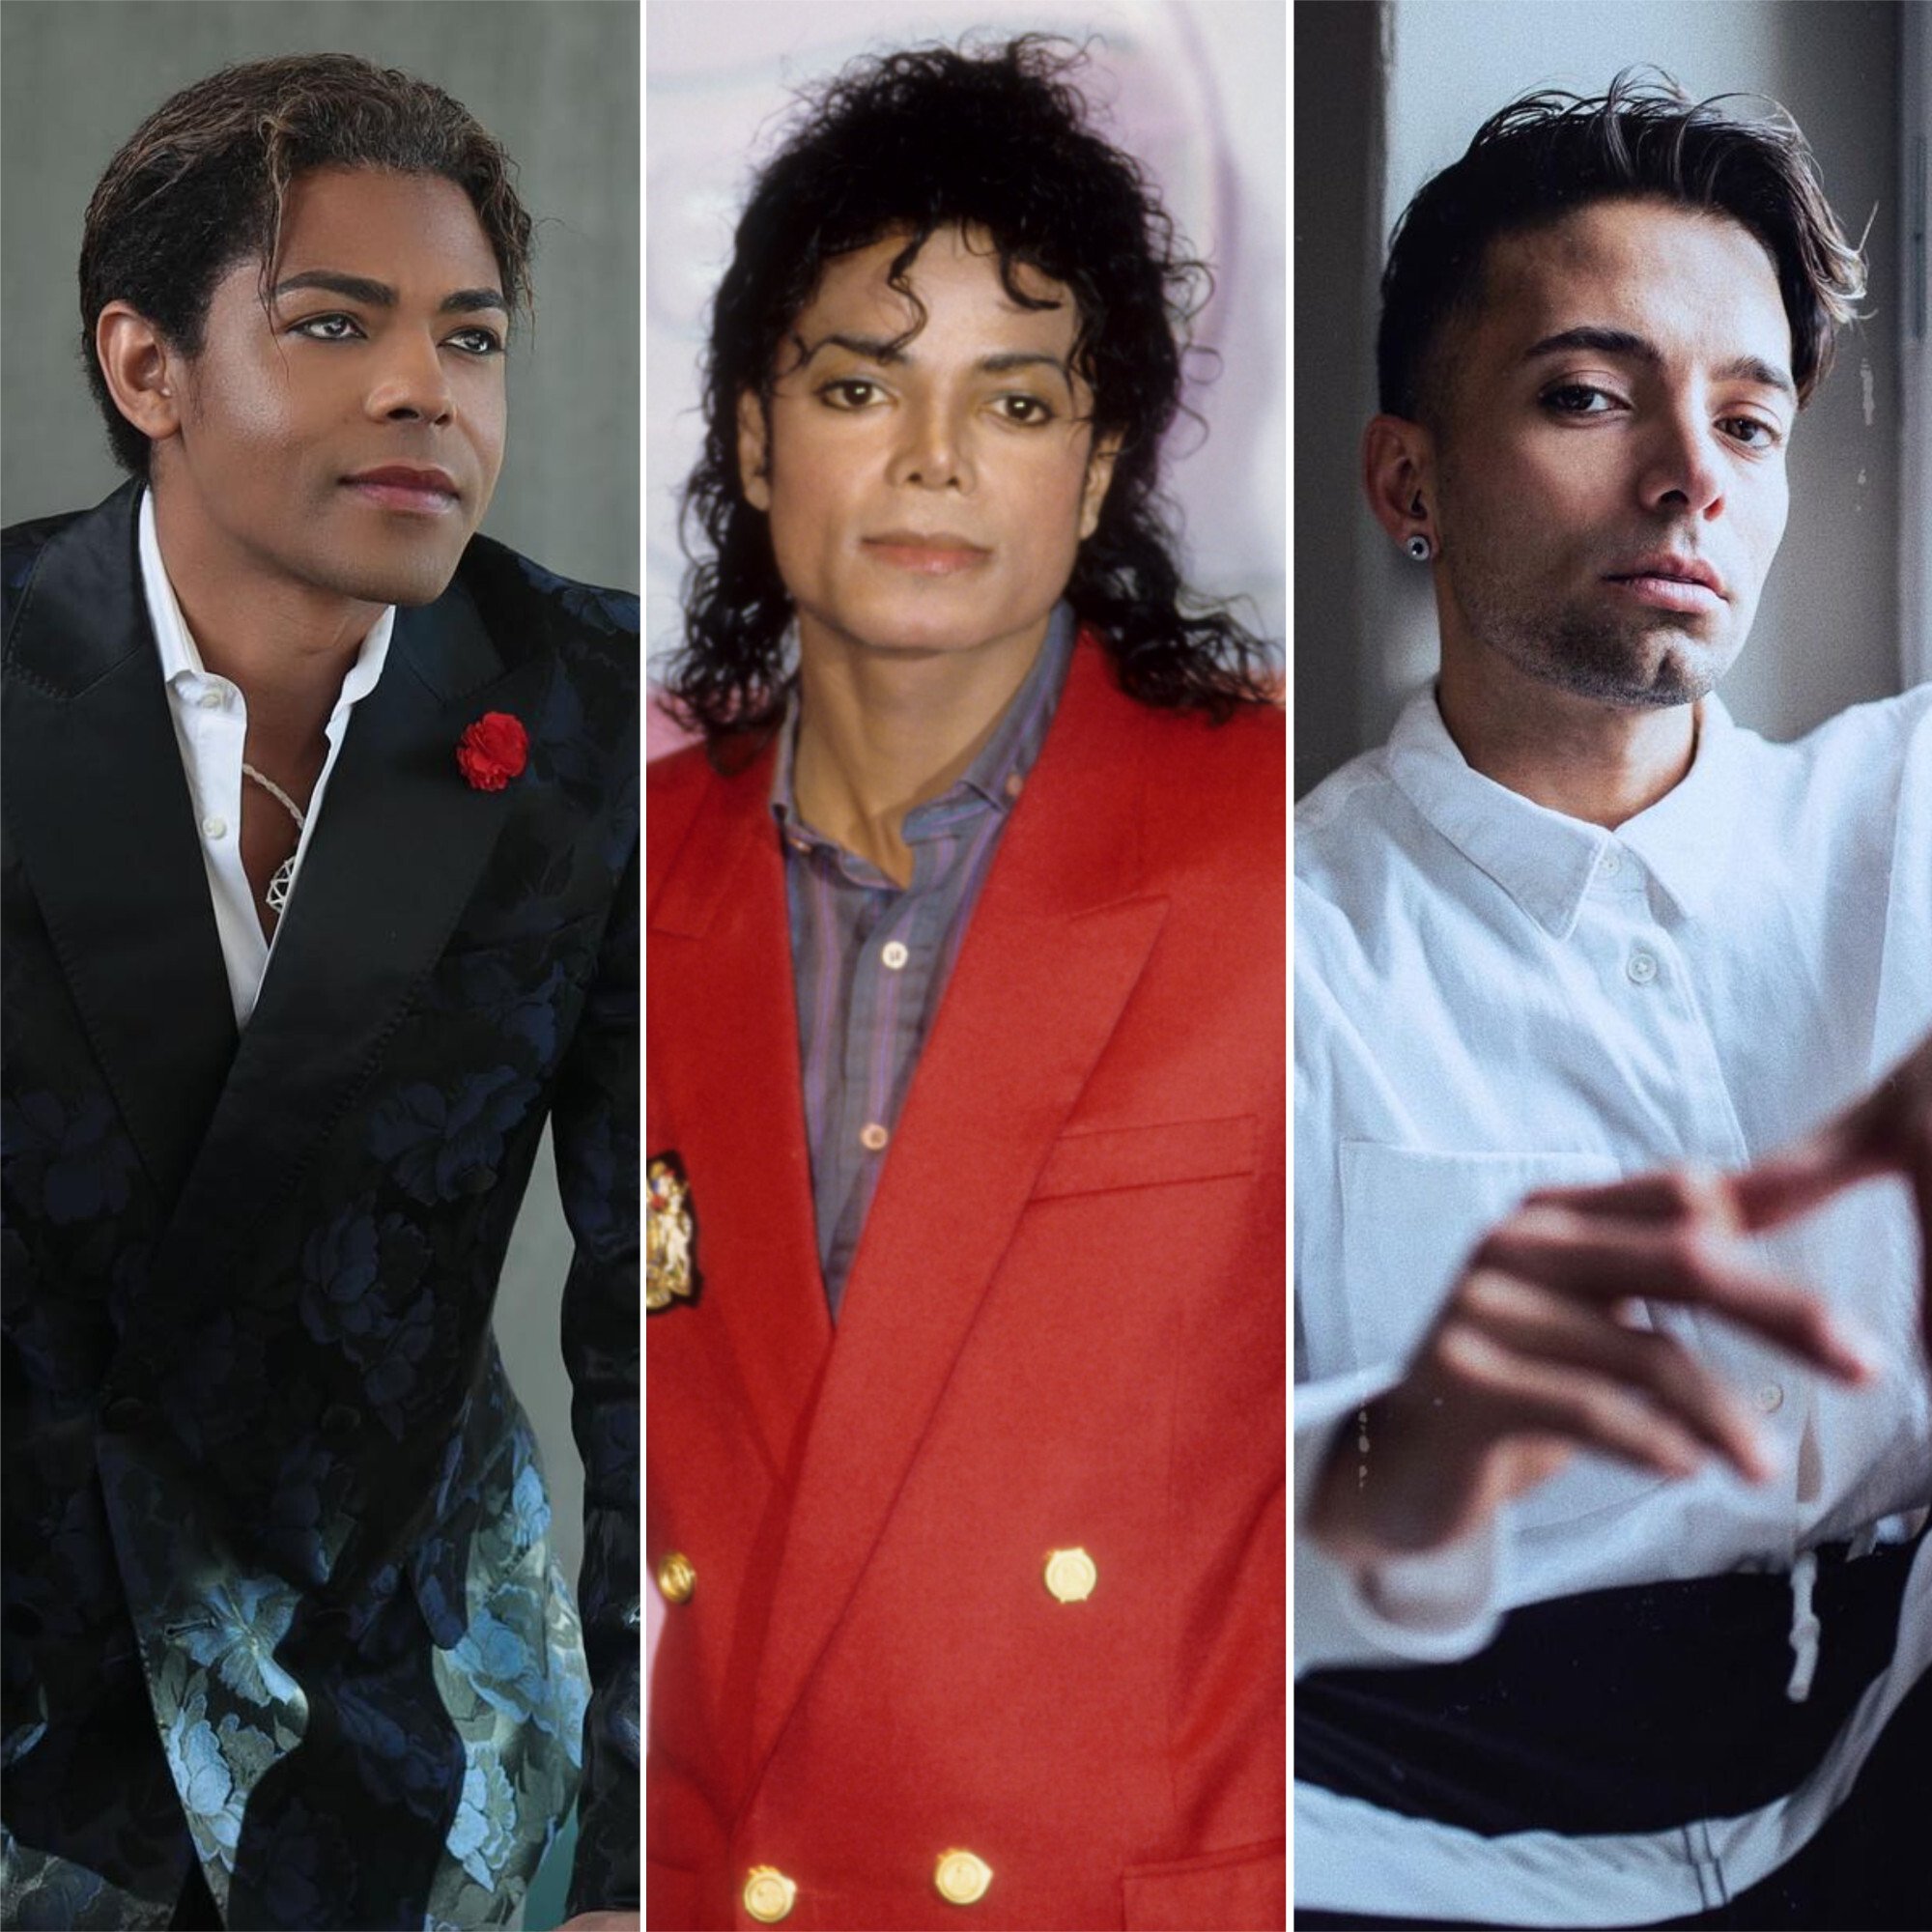 Michael Jackson facts: Singer's wife, kids, age, albums, net worth